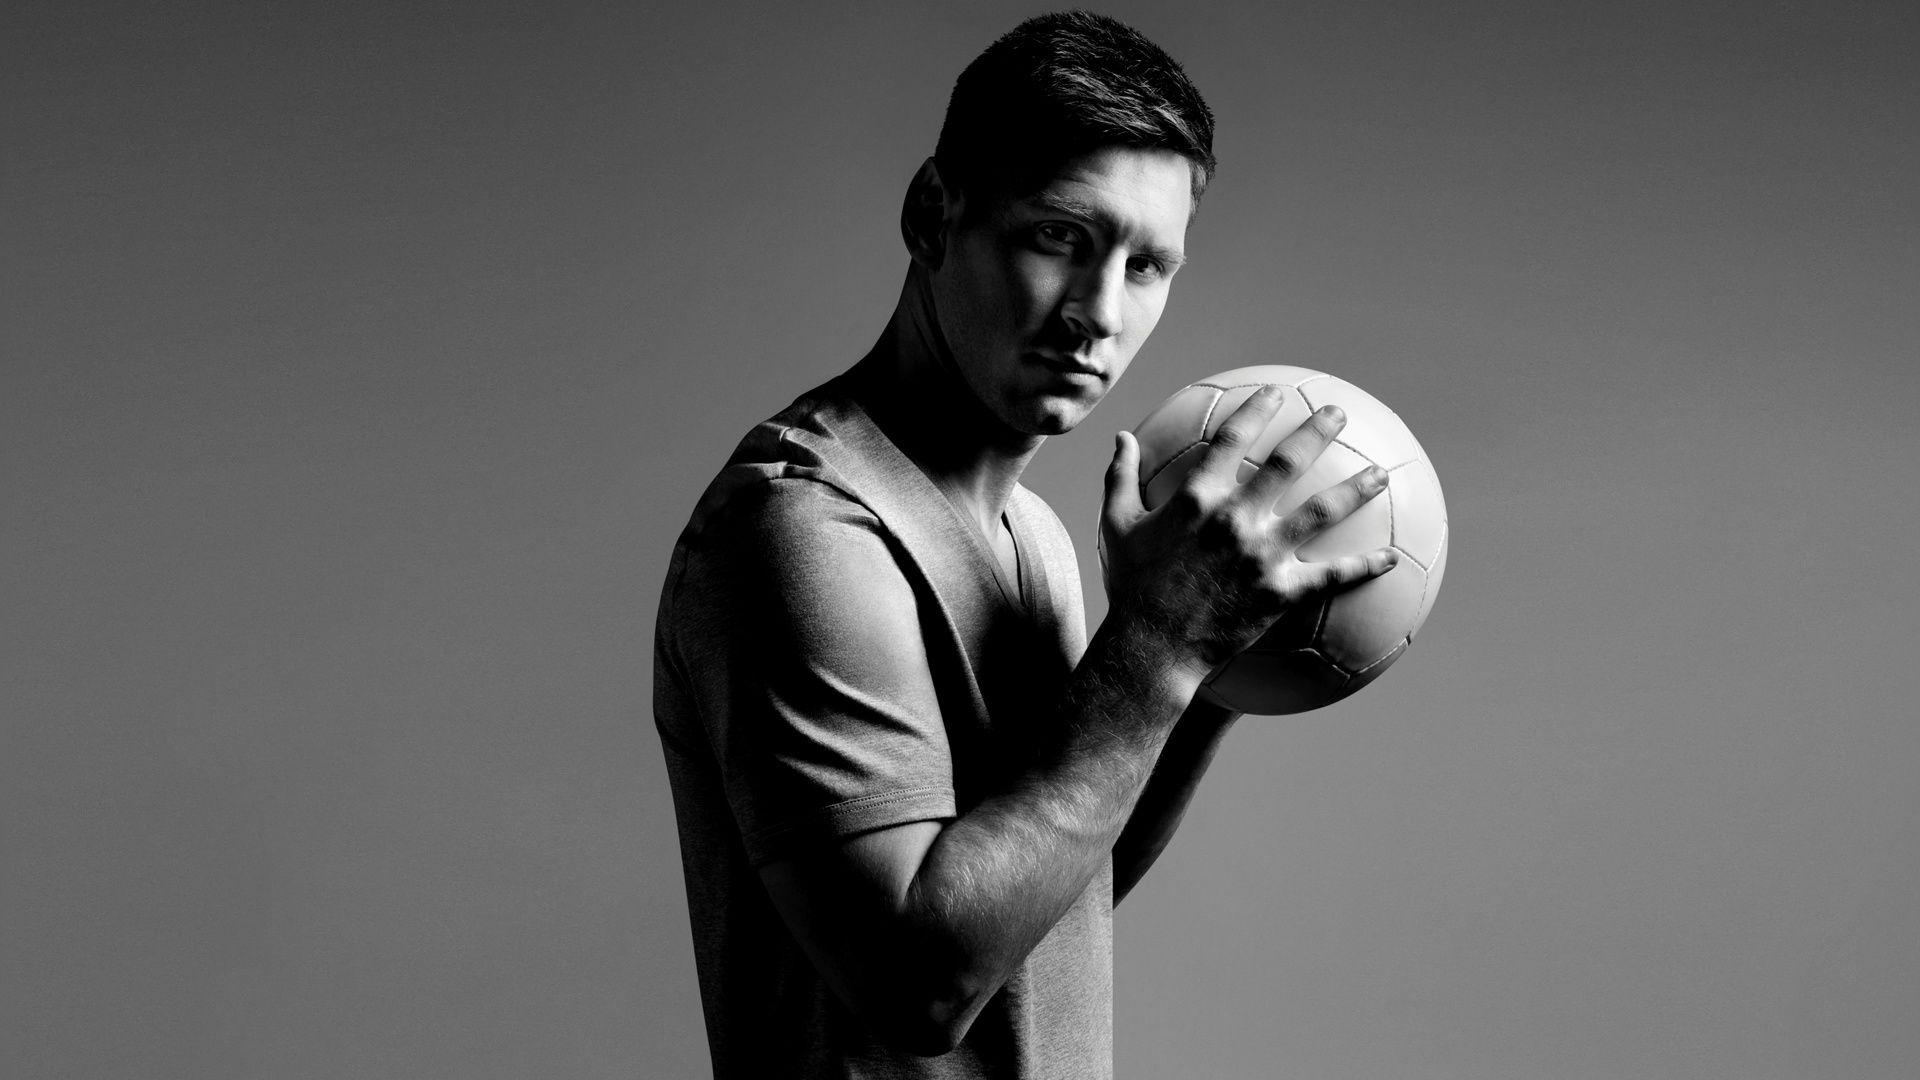 Lionel Messi New HD Wallpaper And Latest Photo Gallery